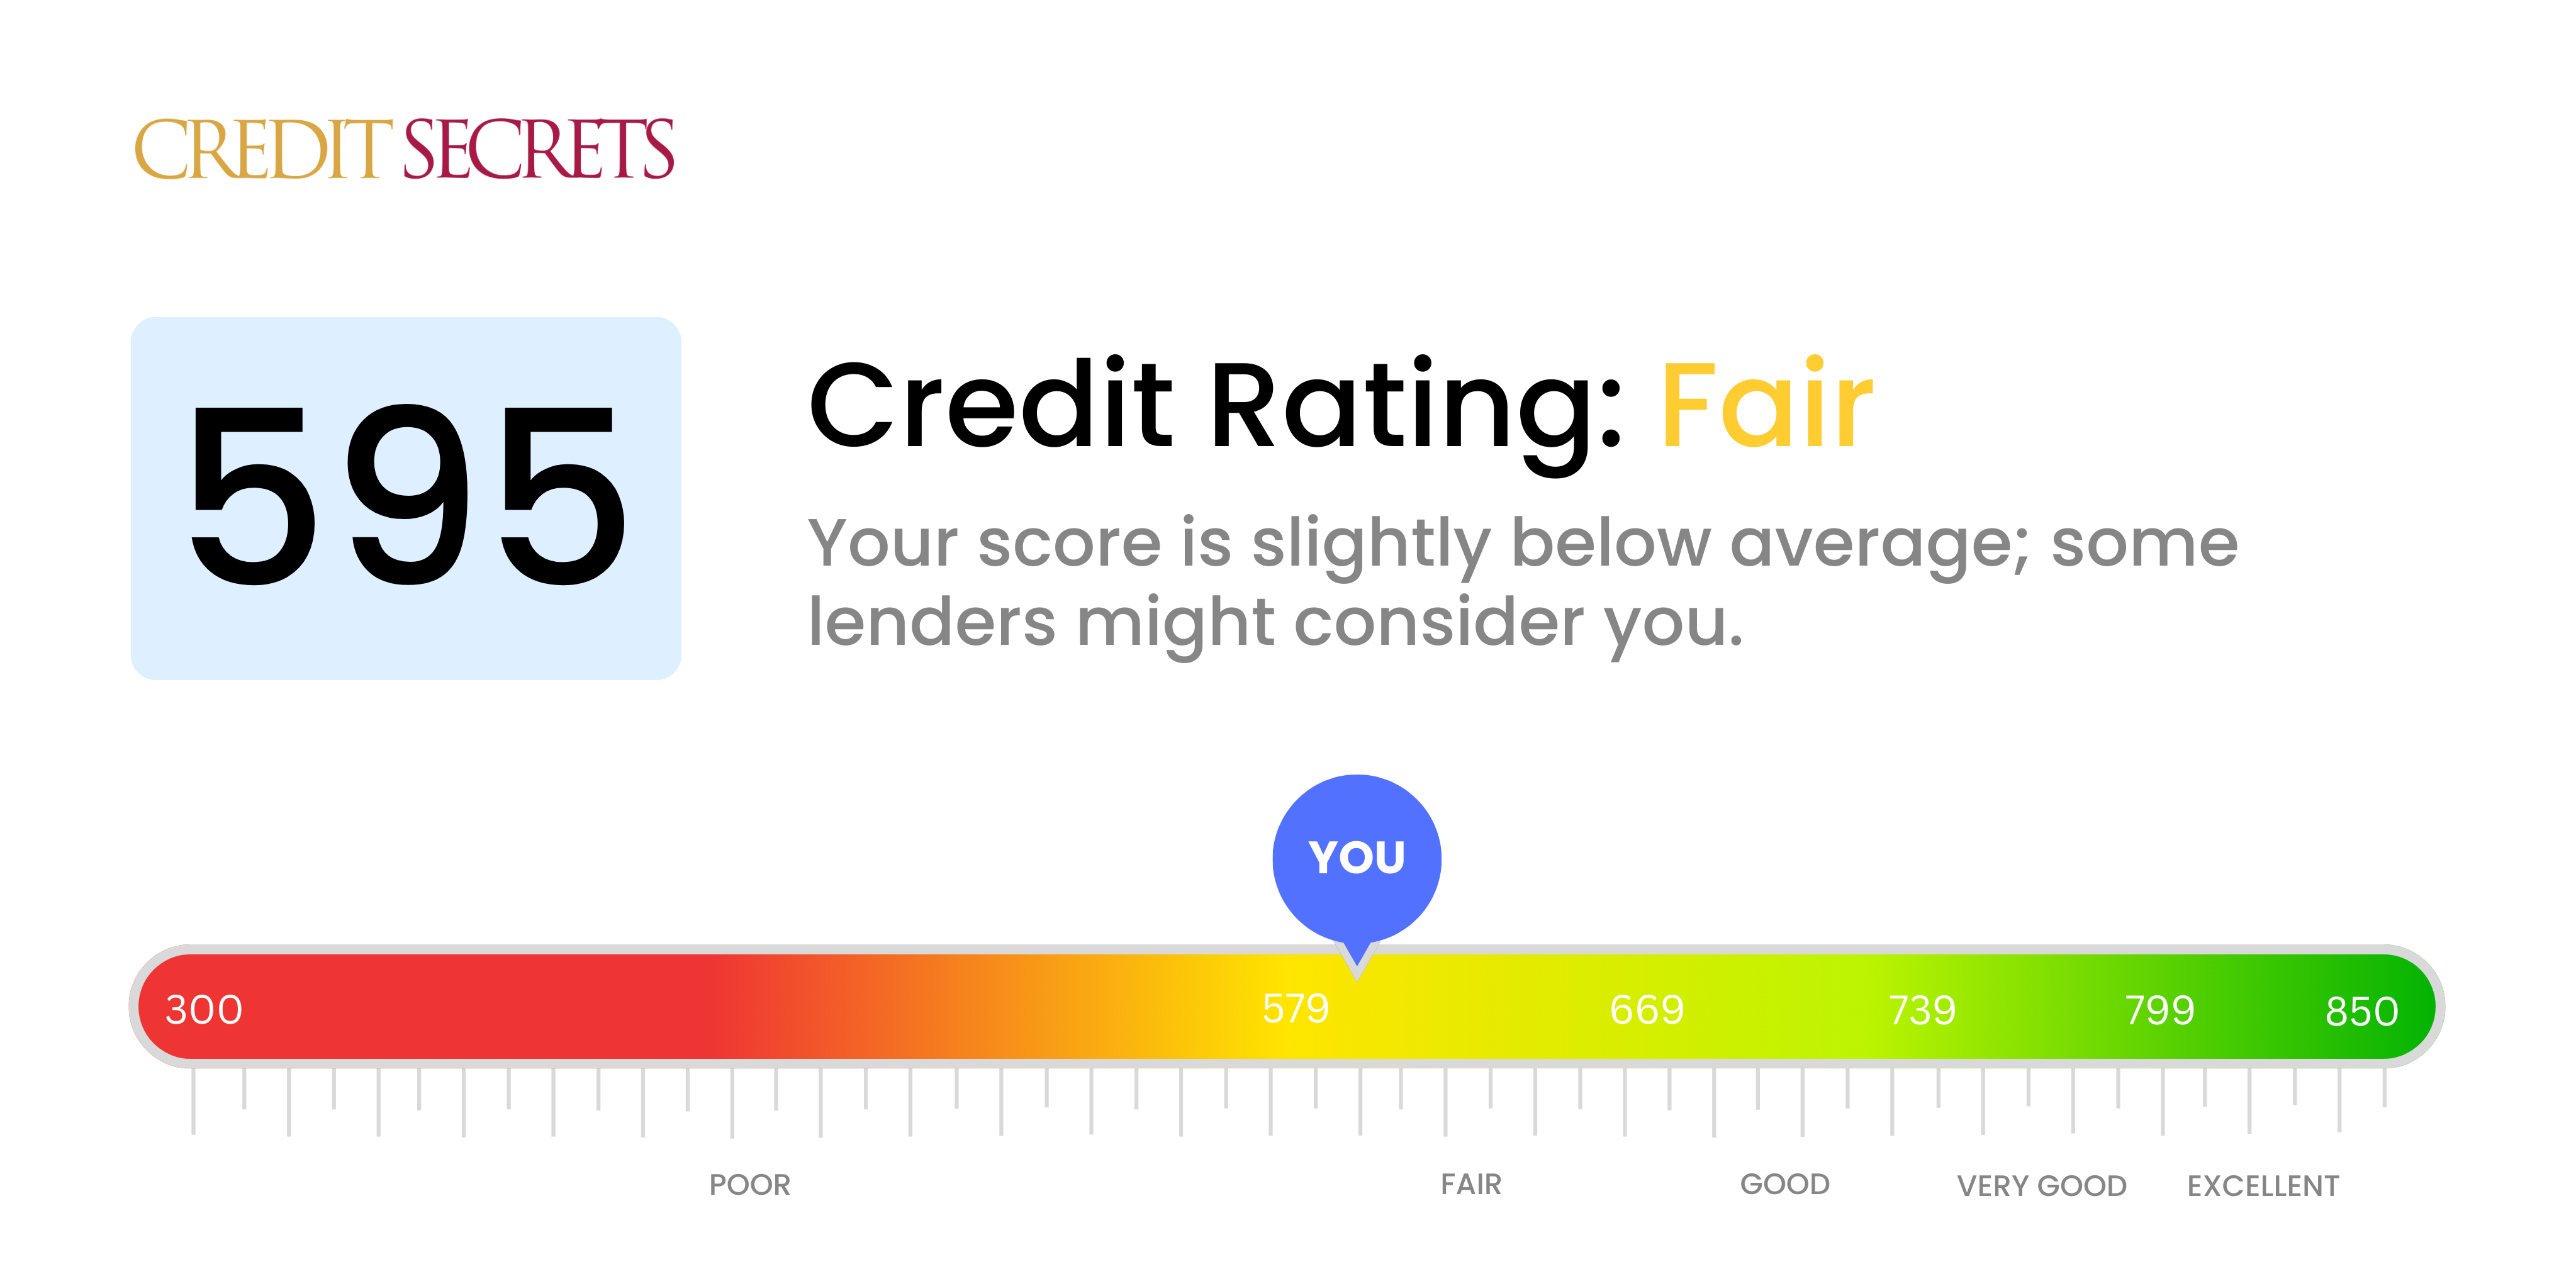 Is 595 a good credit score?